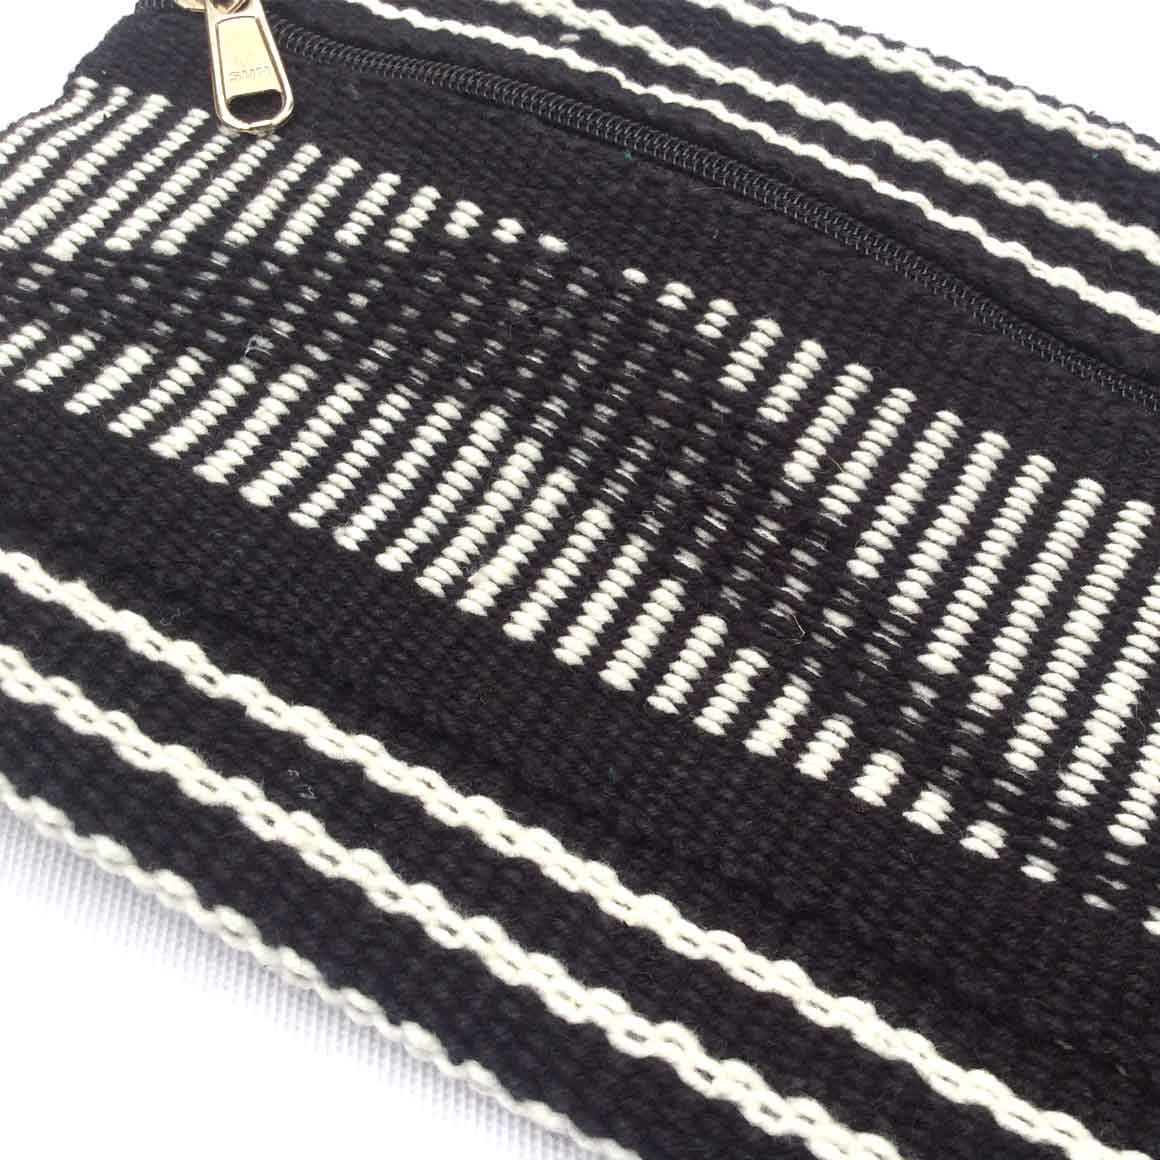 Fair Trade Ethical Hand Woven Pencil Case Black and White